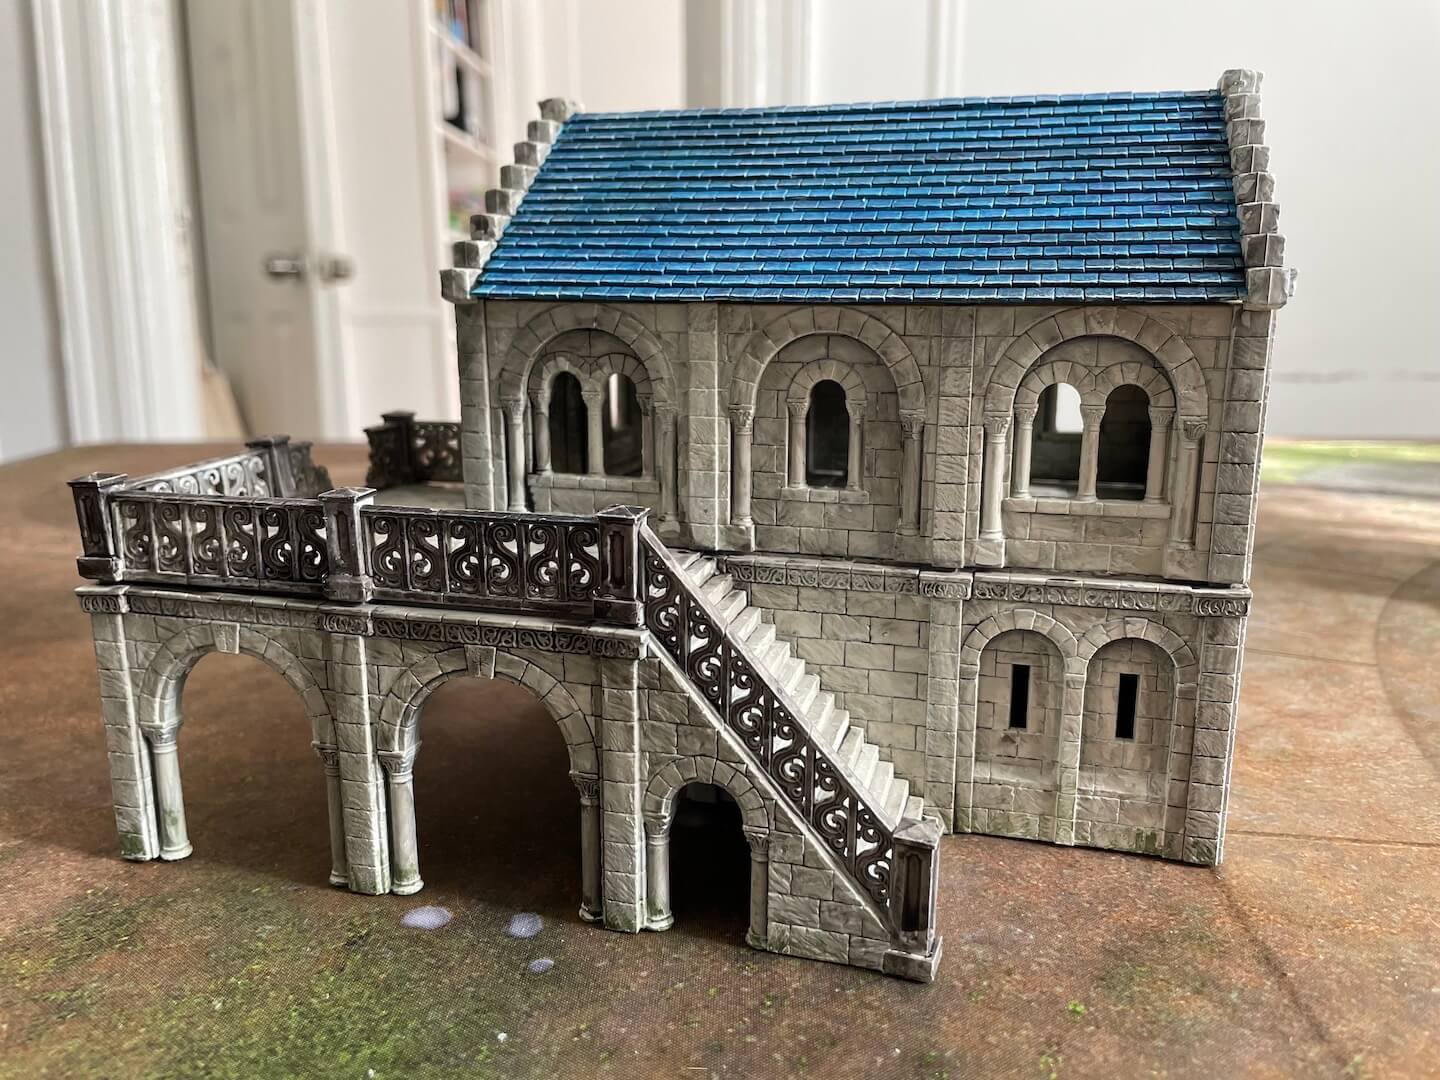 An image of the Games Workshop LOTR terrain Gondor Mansion, painted